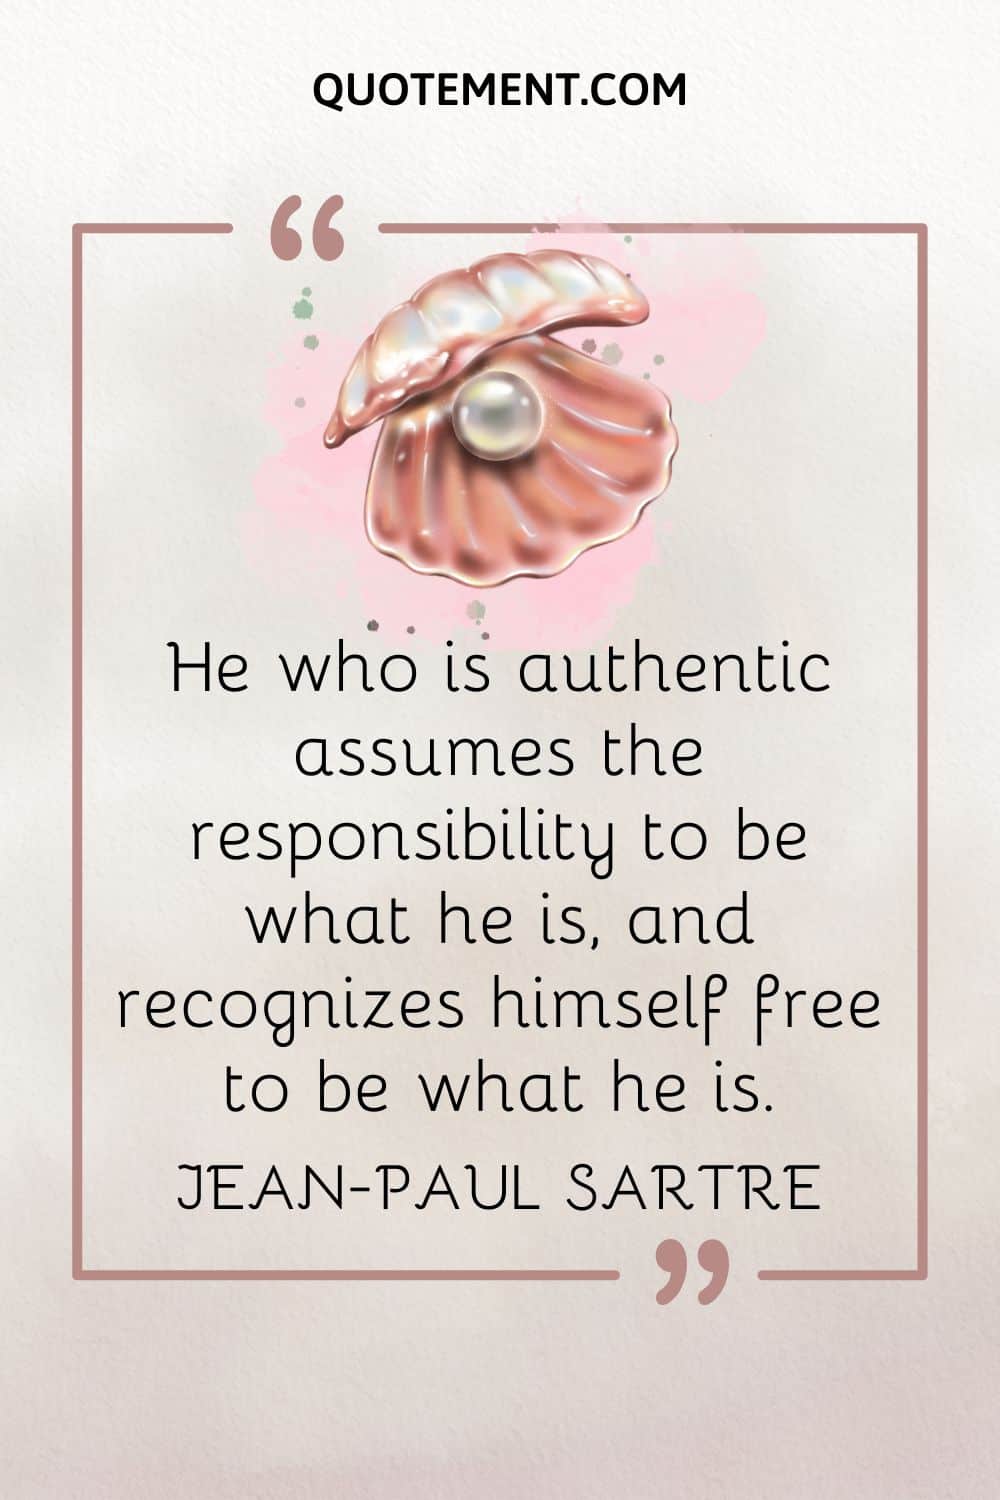 He who is authentic assumes the responsibility to be what he is, and recognizes himself free to be what he is